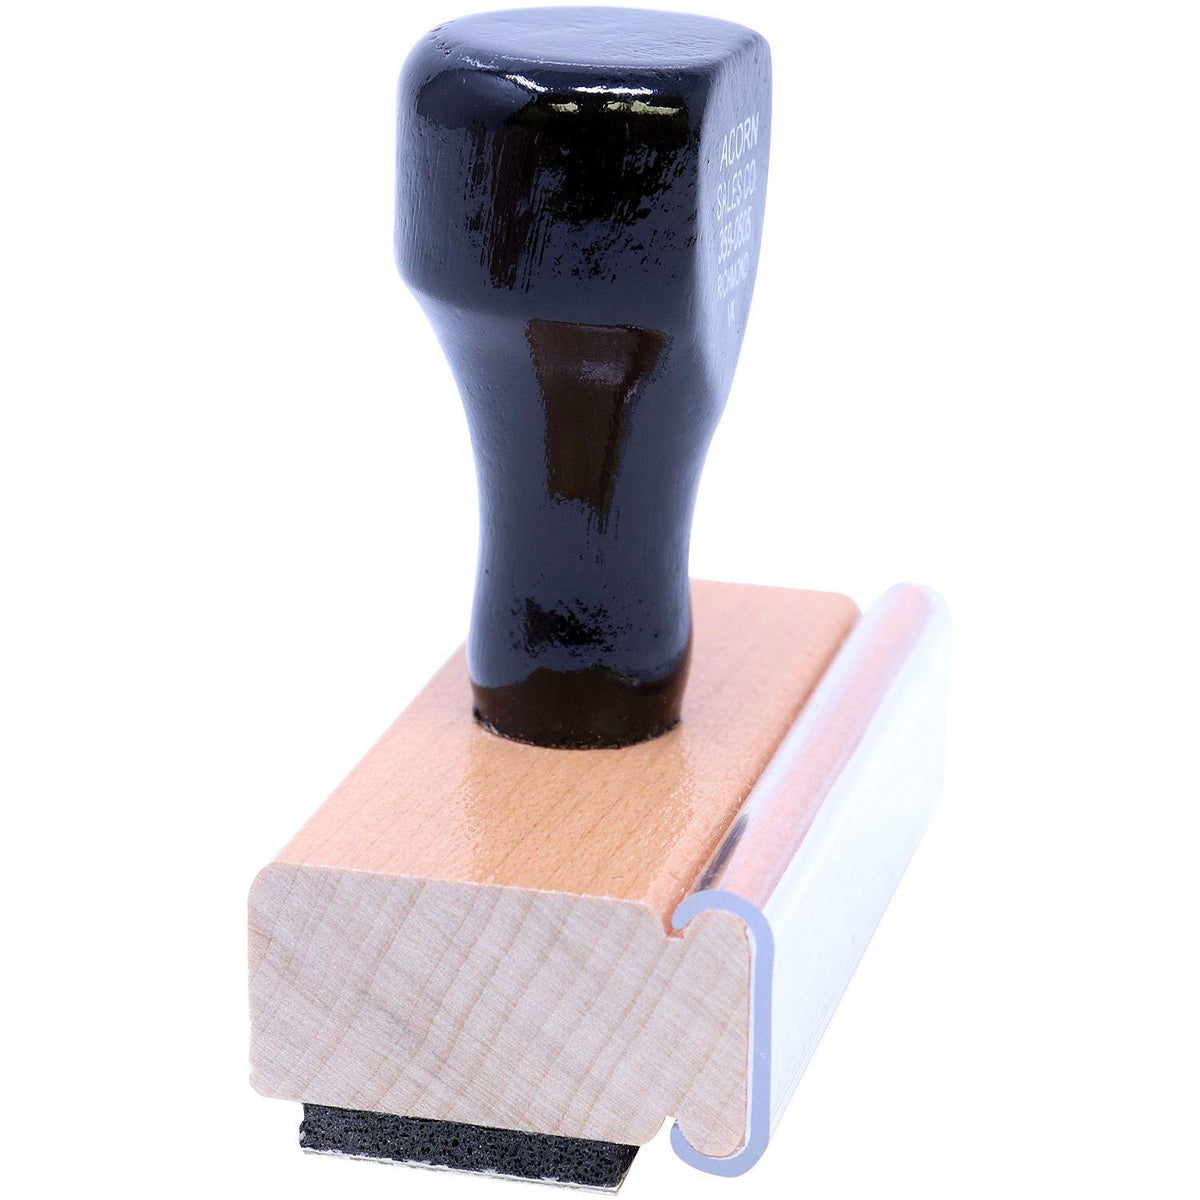 Large Show All Of Your Work Rubber Stamp - Engineer Seal Stamps - Brand_Acorn, Impression Size_Large, Stamp Type_Regular Stamp, Type of Use_Teacher